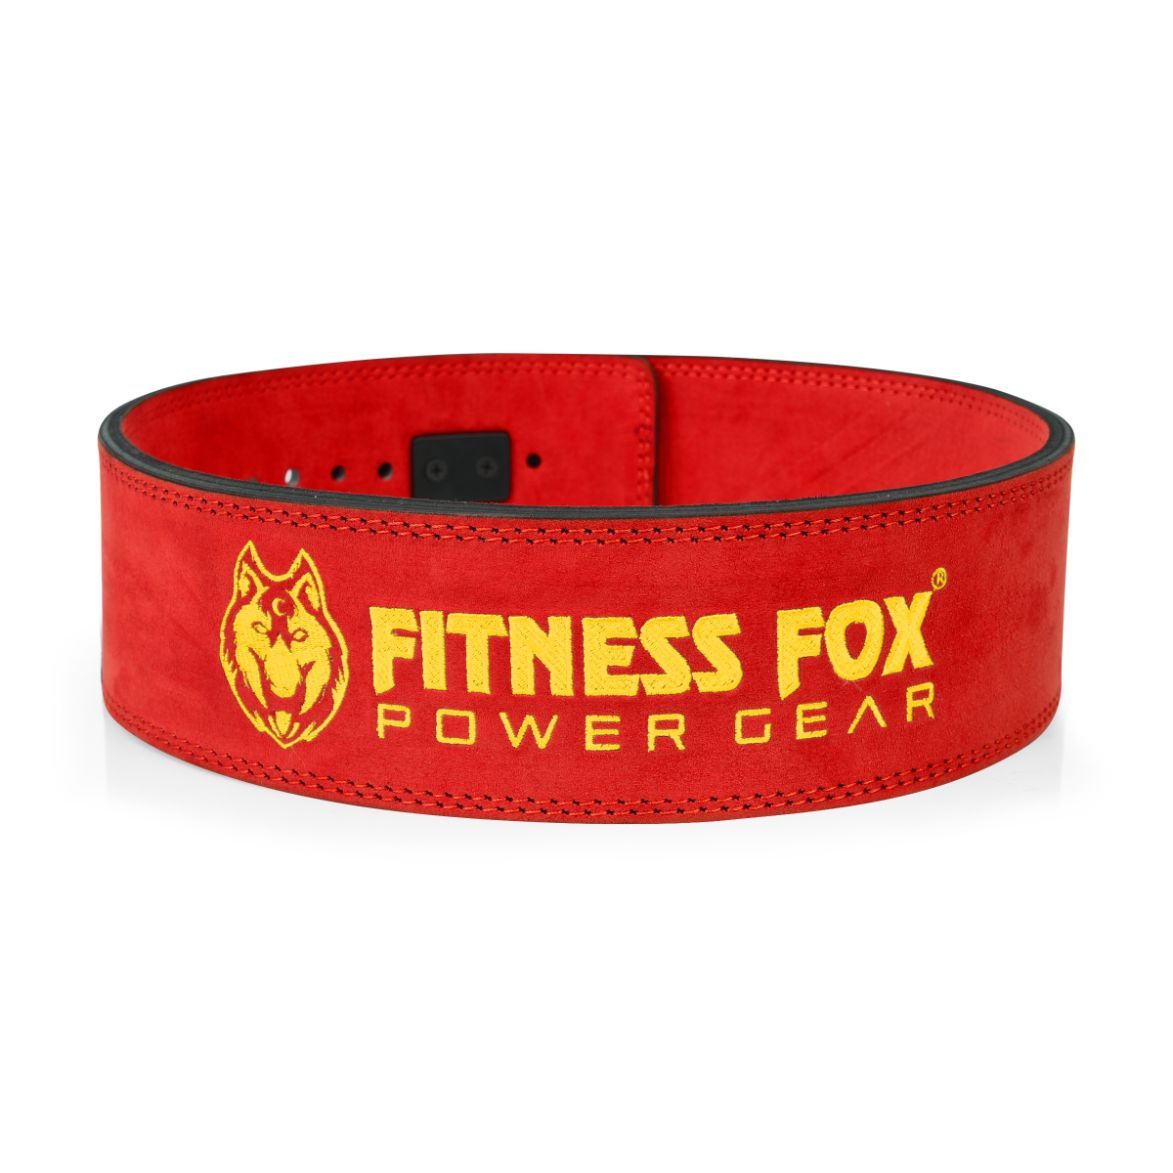 FITNESS FOX 13MM Weightlifting Lever Belt